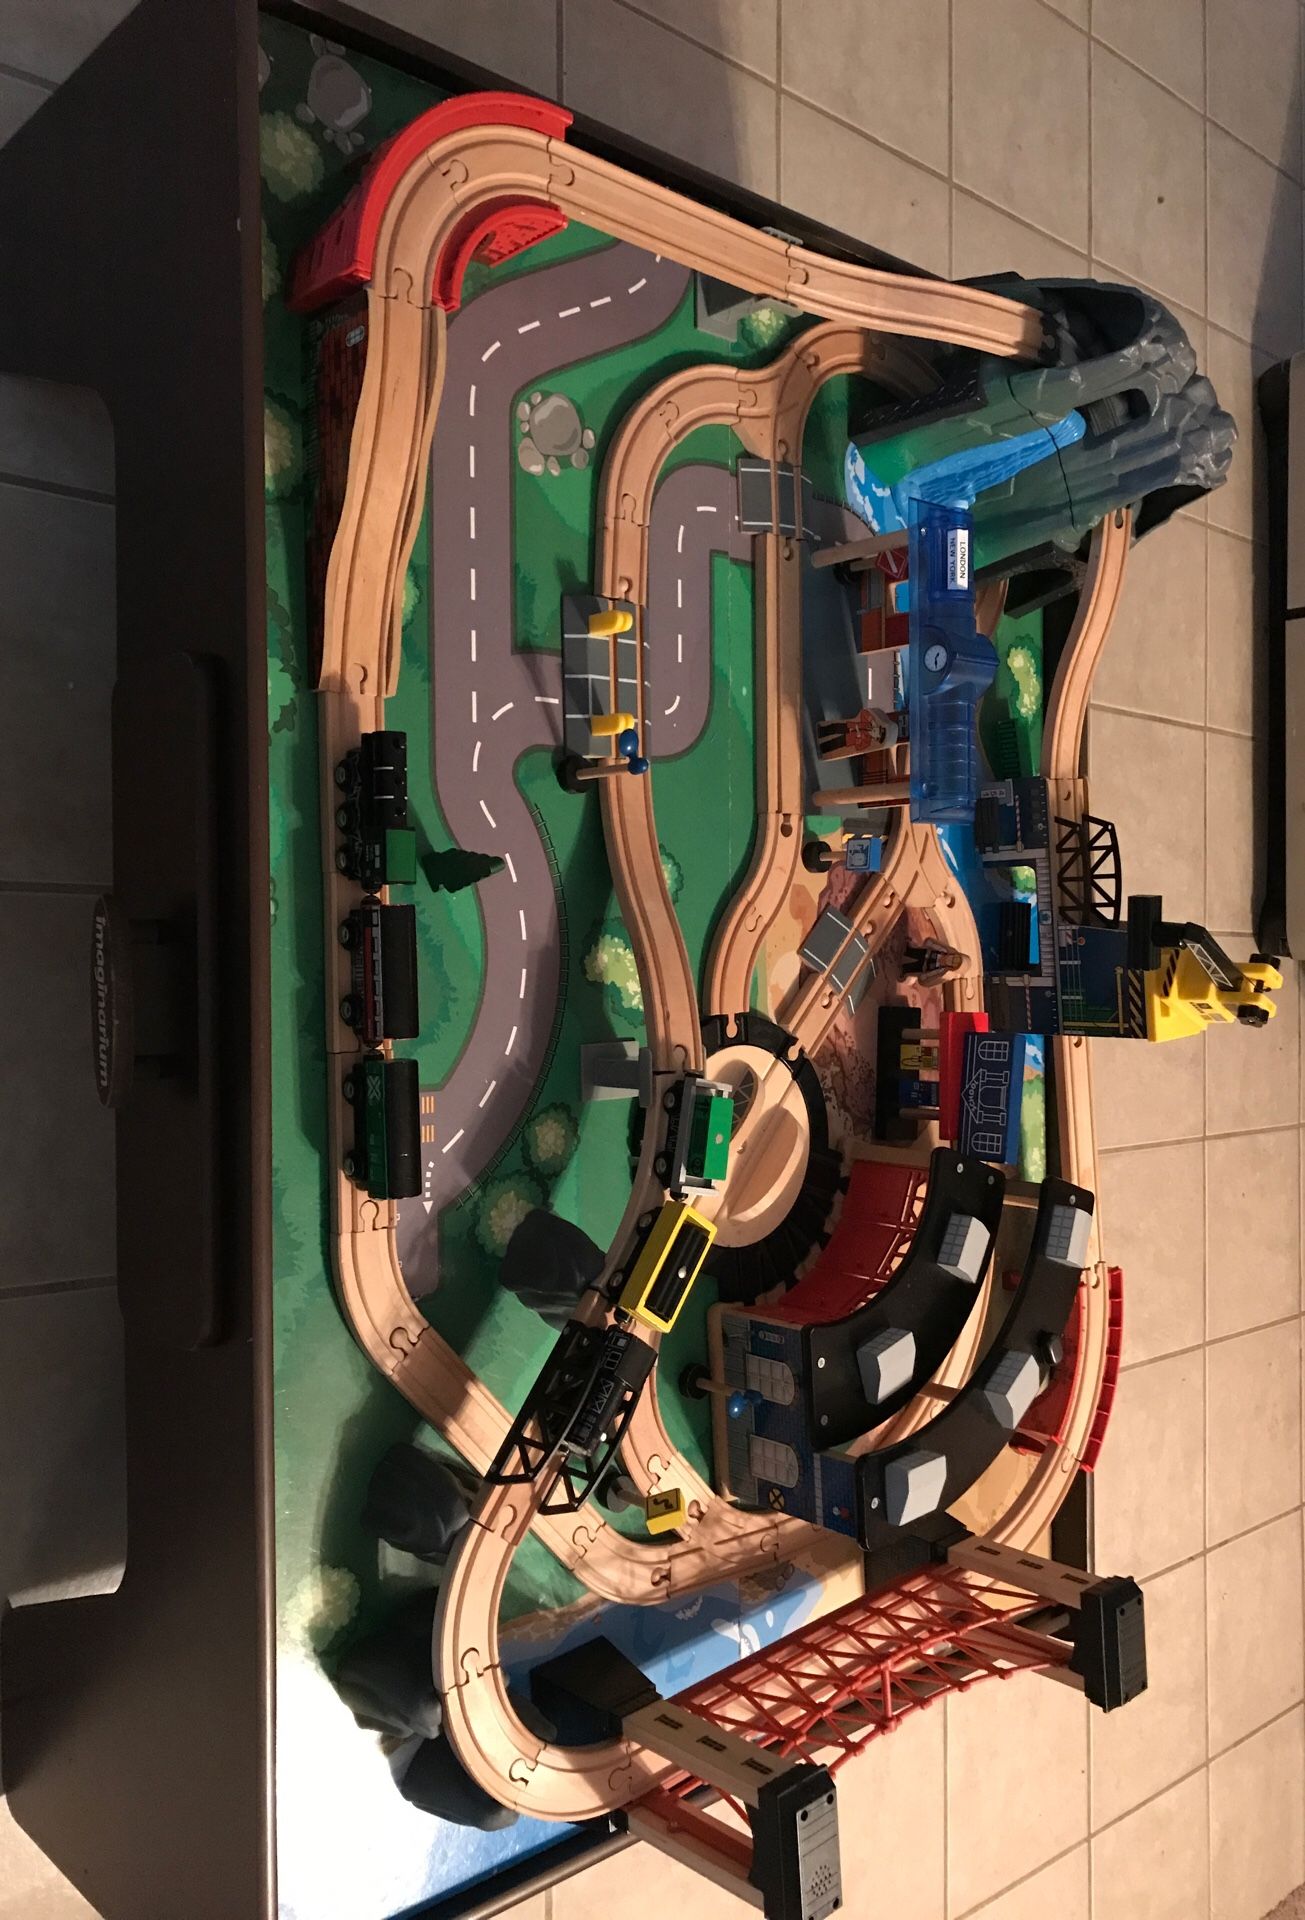 Imagination train set and table